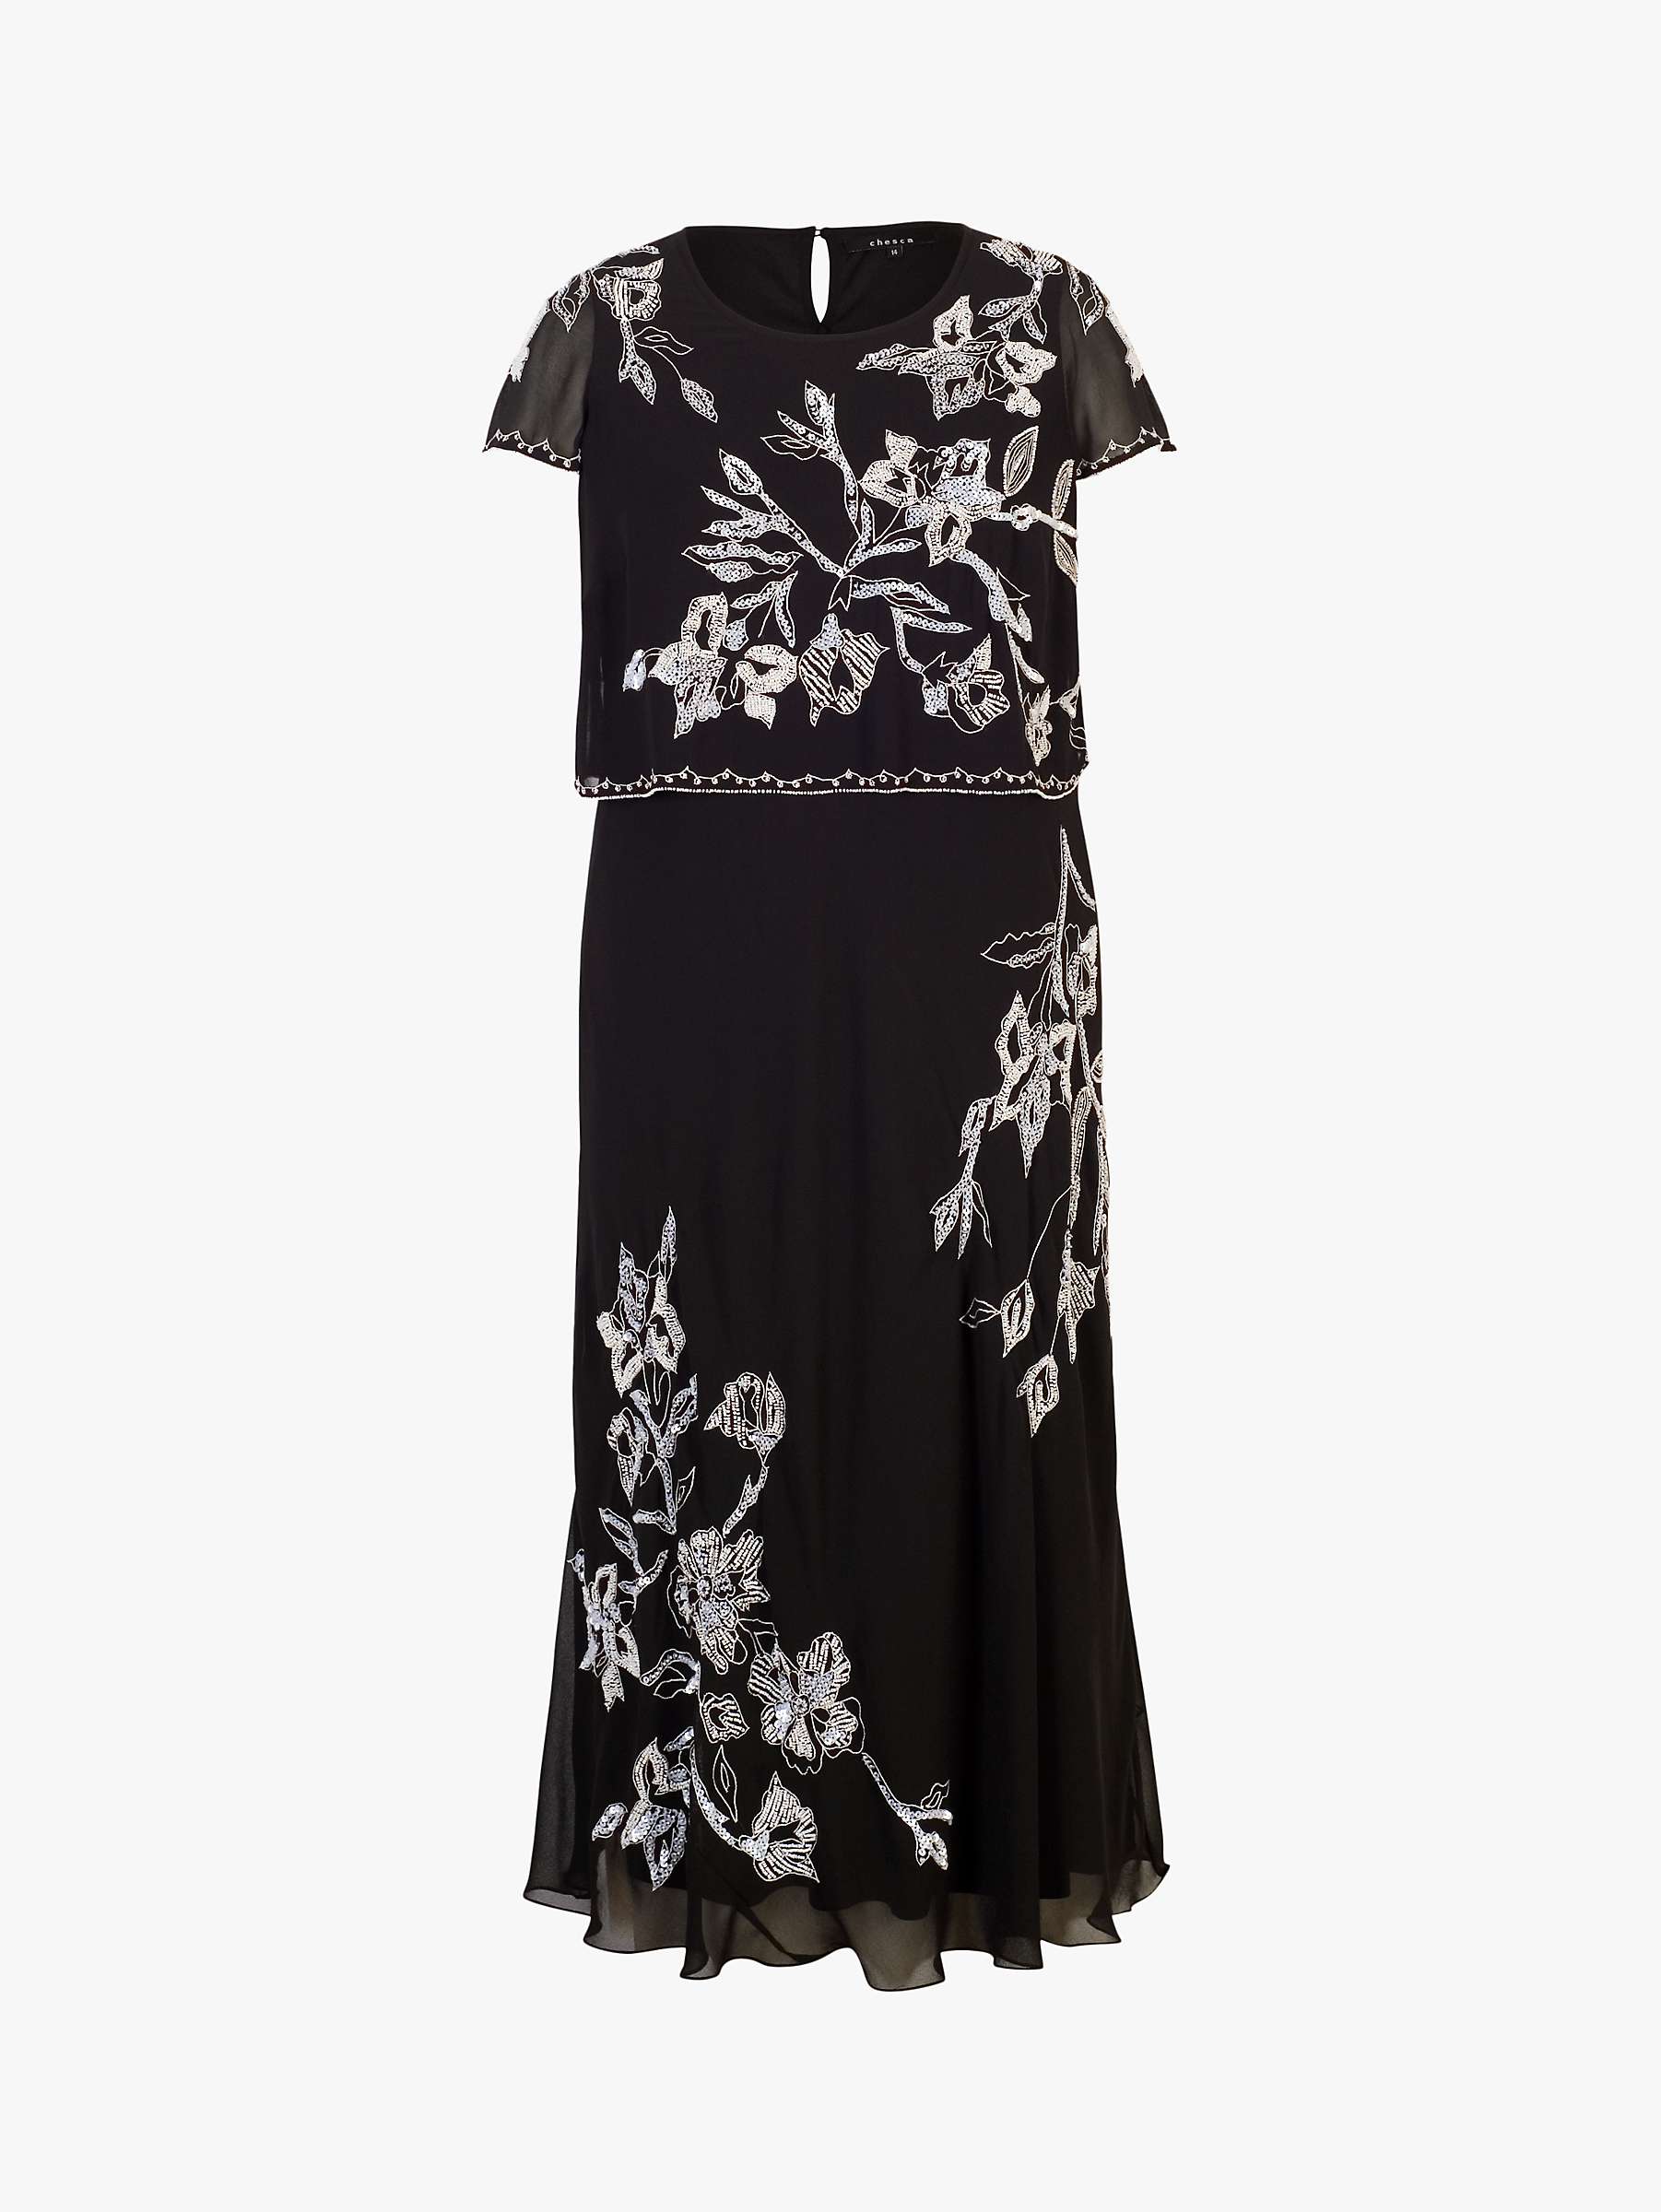 Buy chesca Lily Bead Embroidered Double Layered Chiffon Dress, Black/Ivory Online at johnlewis.com